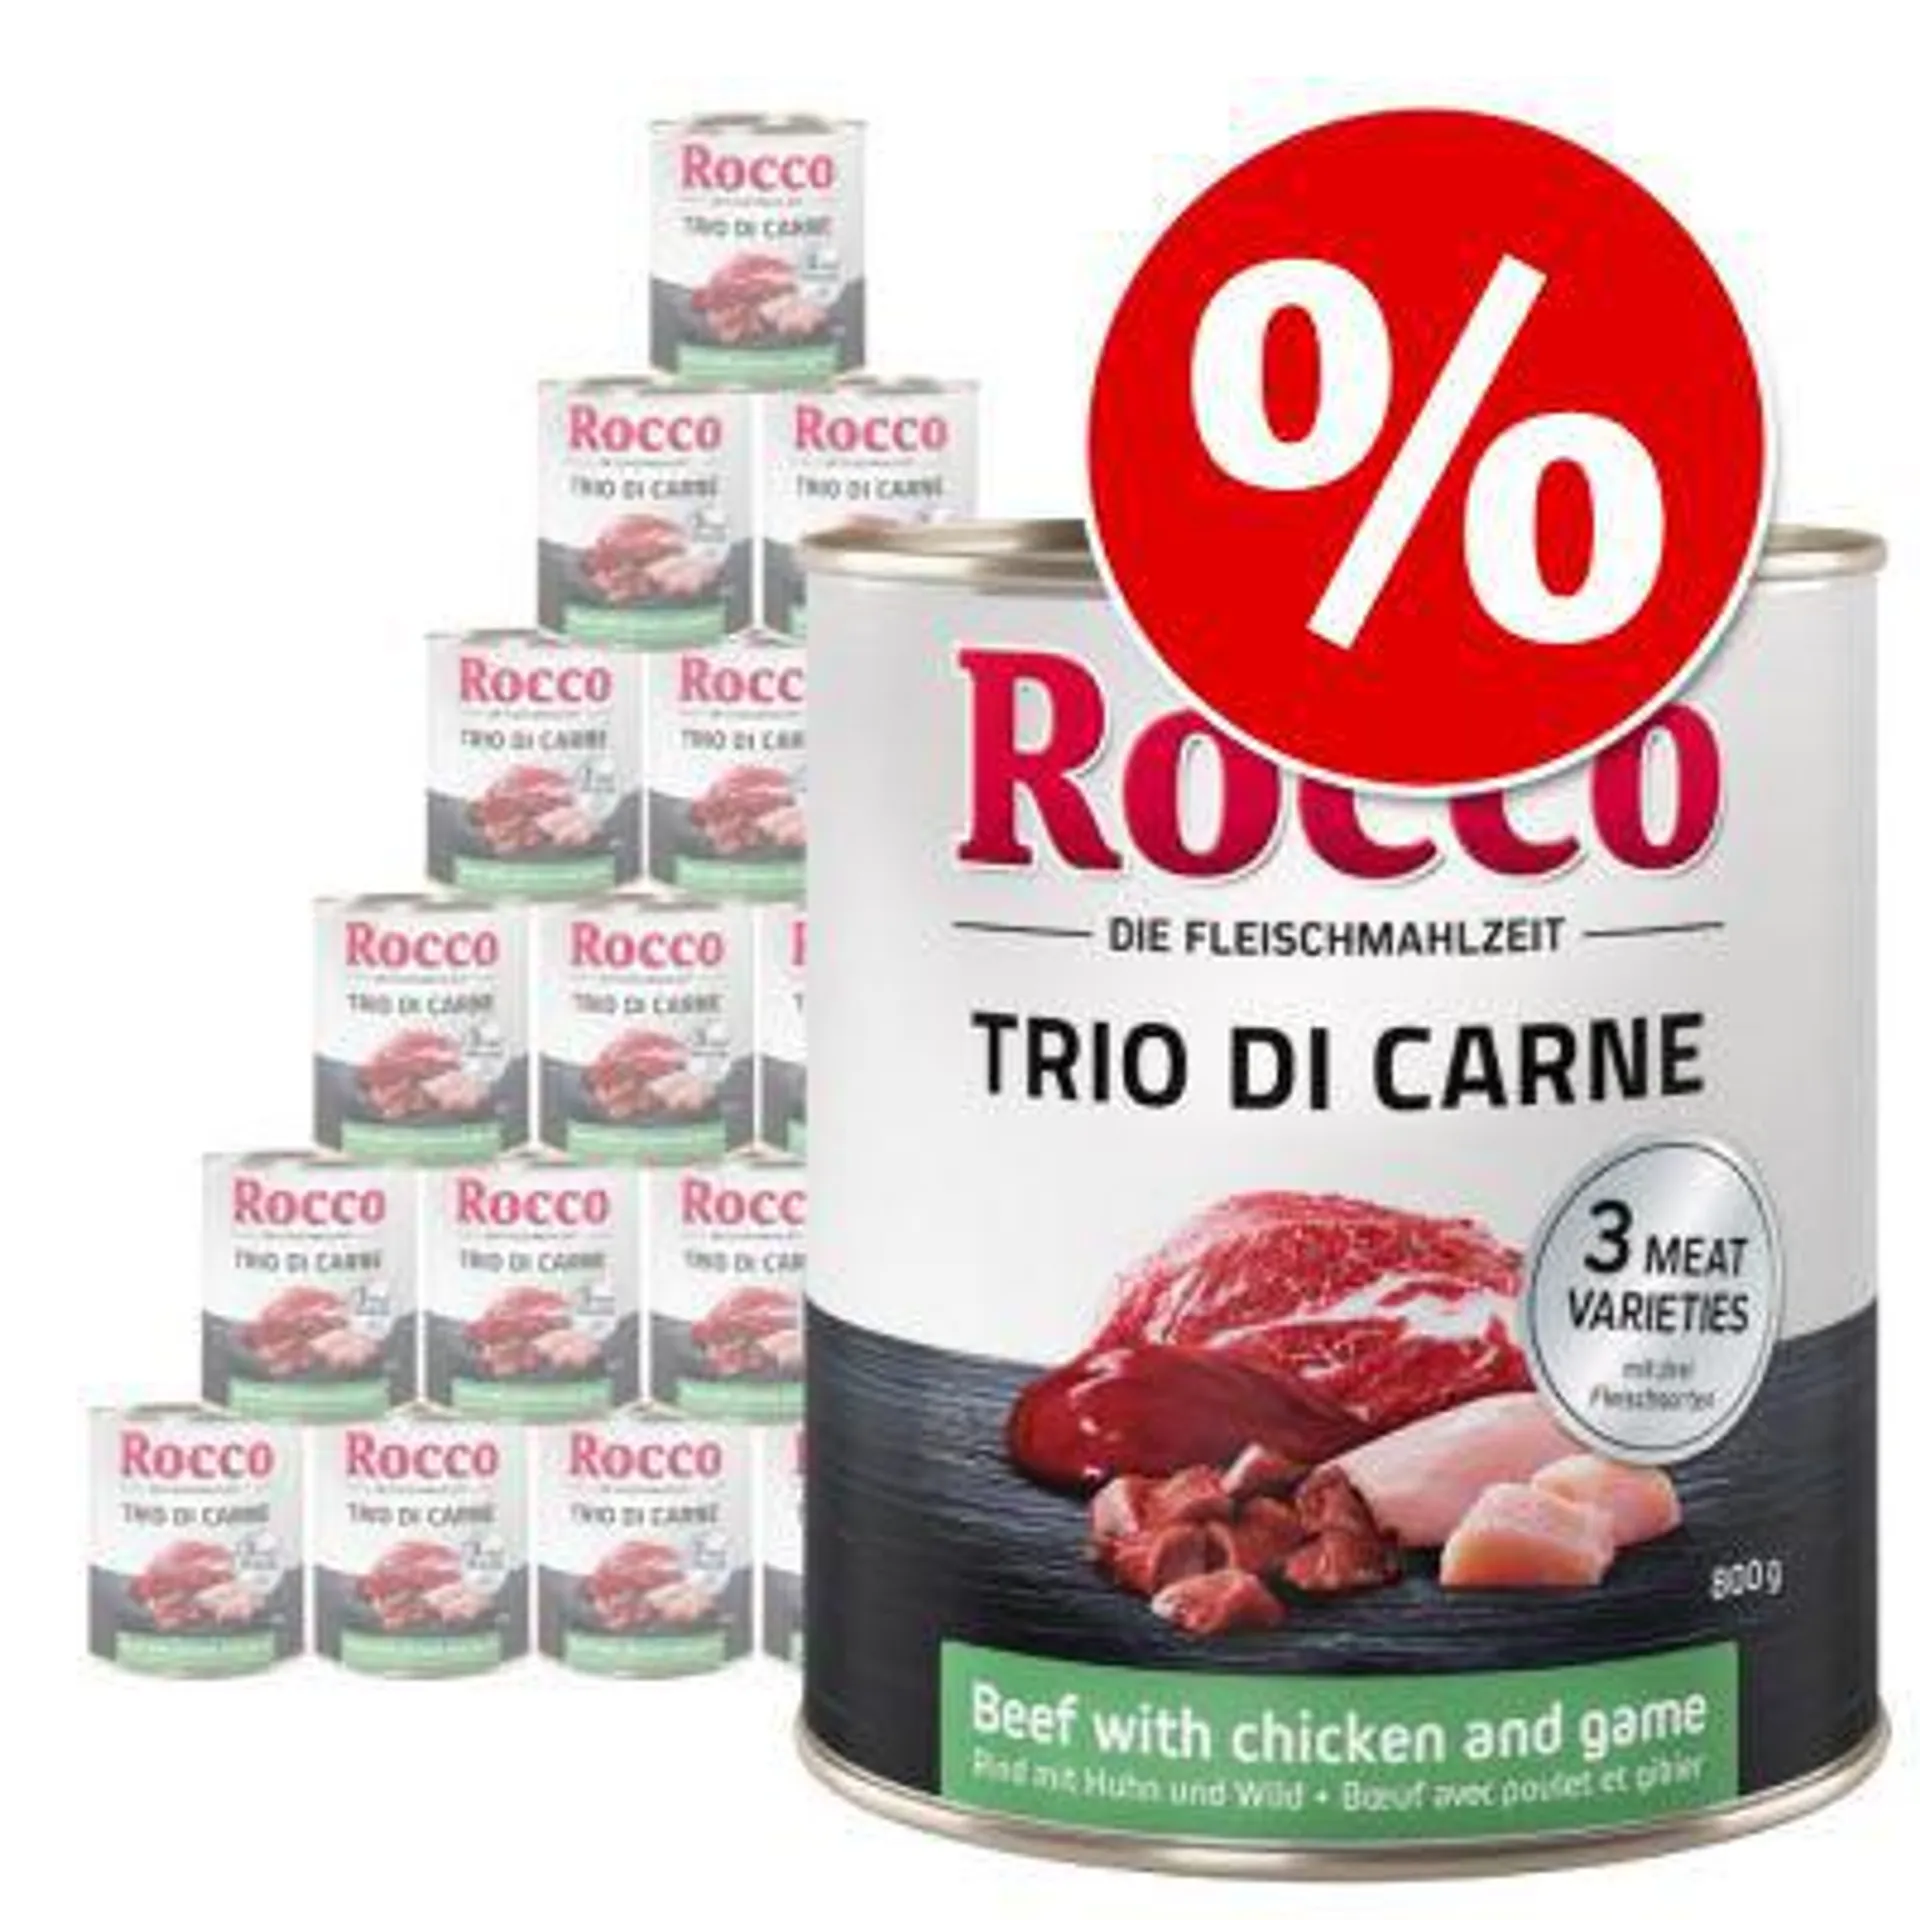 24 x 800g Rocco Classic Trio di Carne Wet Dog Food - Special Price!*